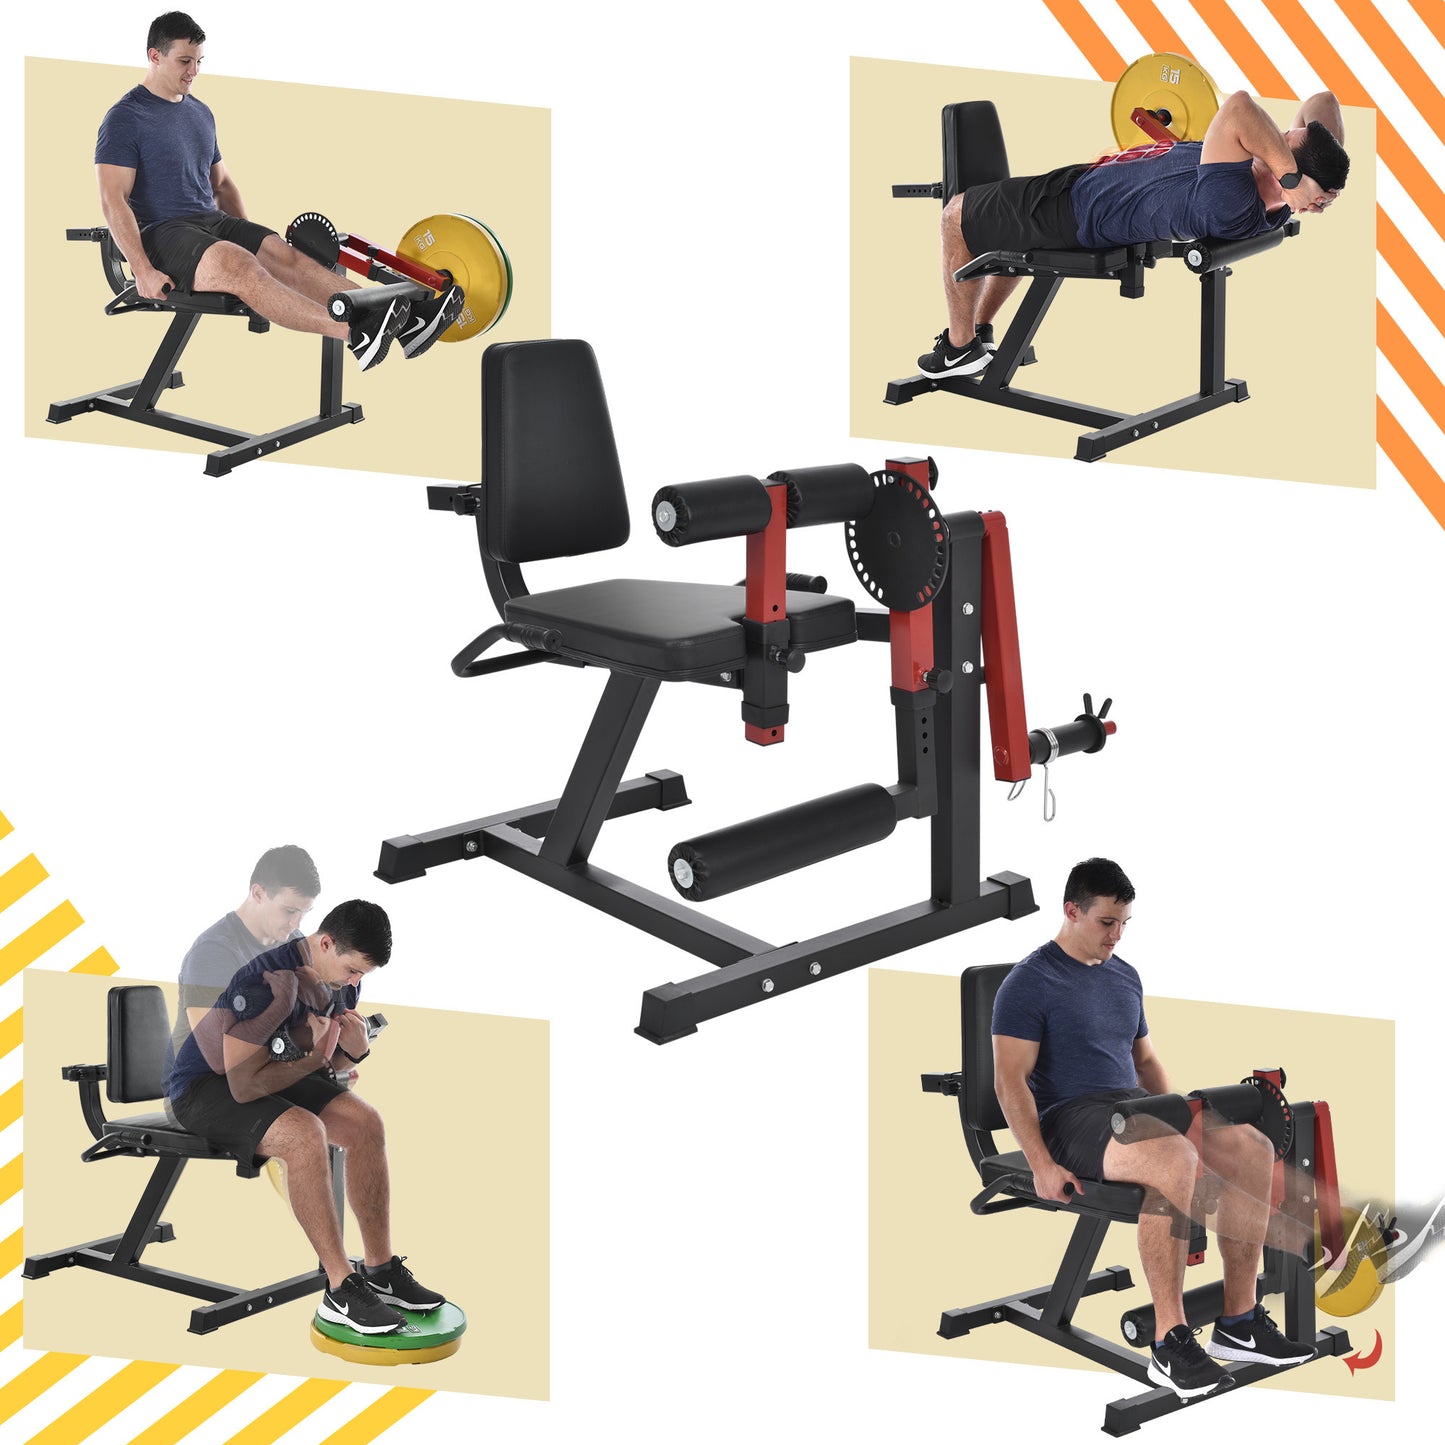 Leg Extension and Curl Machine - Leg Exercise Machine with Adjustable Seat Backrest and Rotary Leg Extenstion, Adjustable Leg Curl for Home Gym Hamstring Workout and Quadriceps Exercises